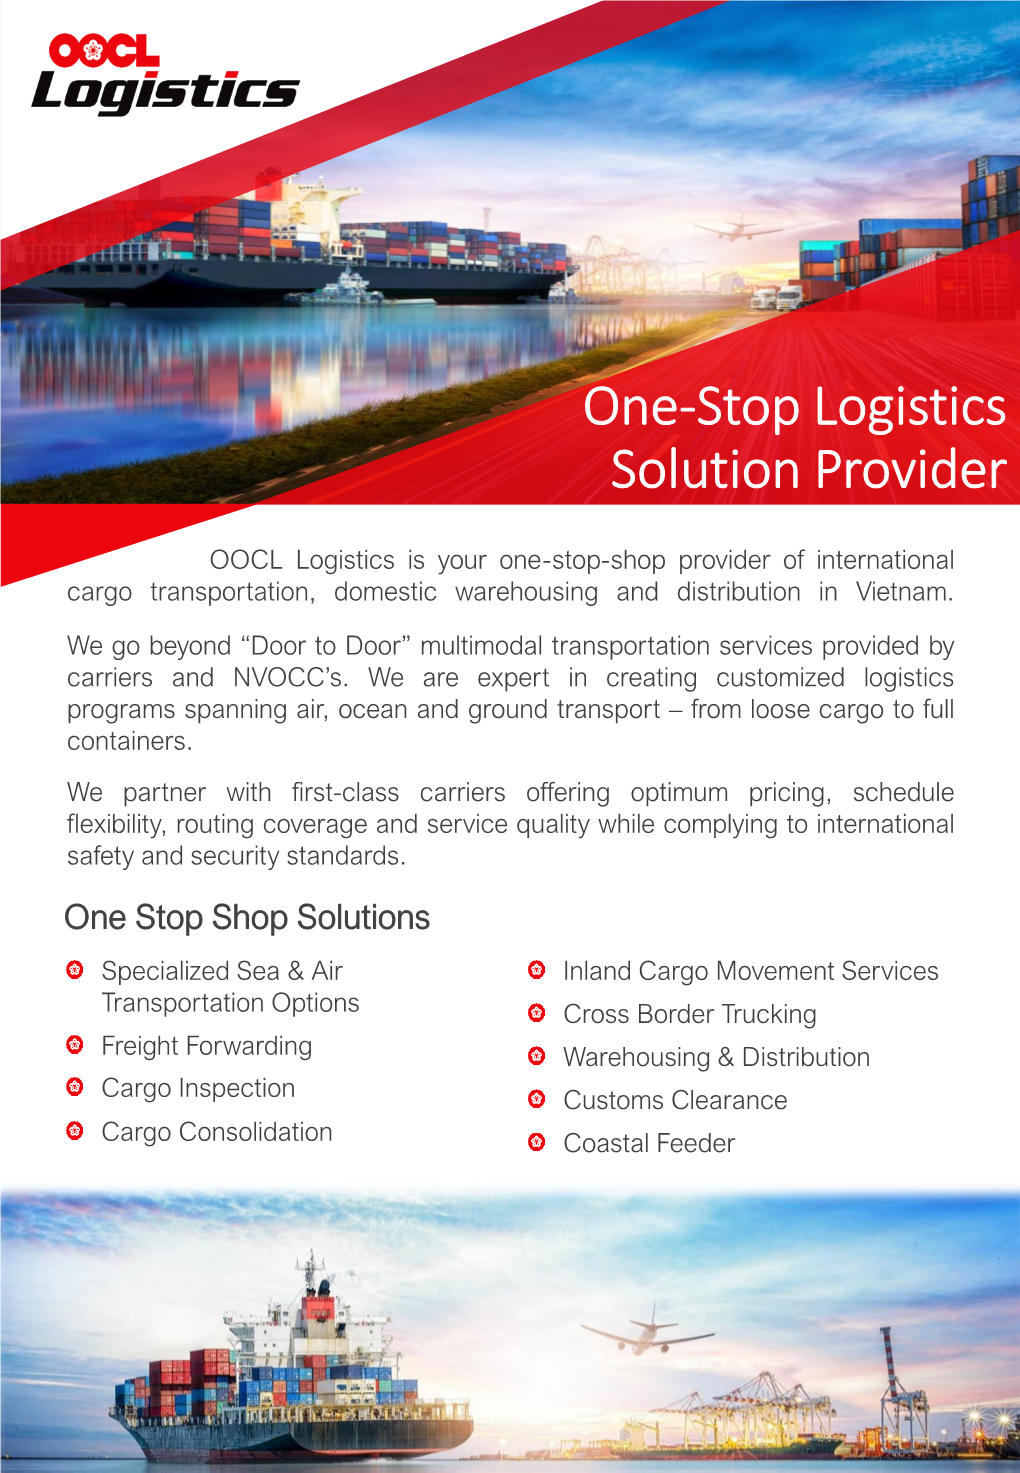 One-Stop Logistics Solution Provider